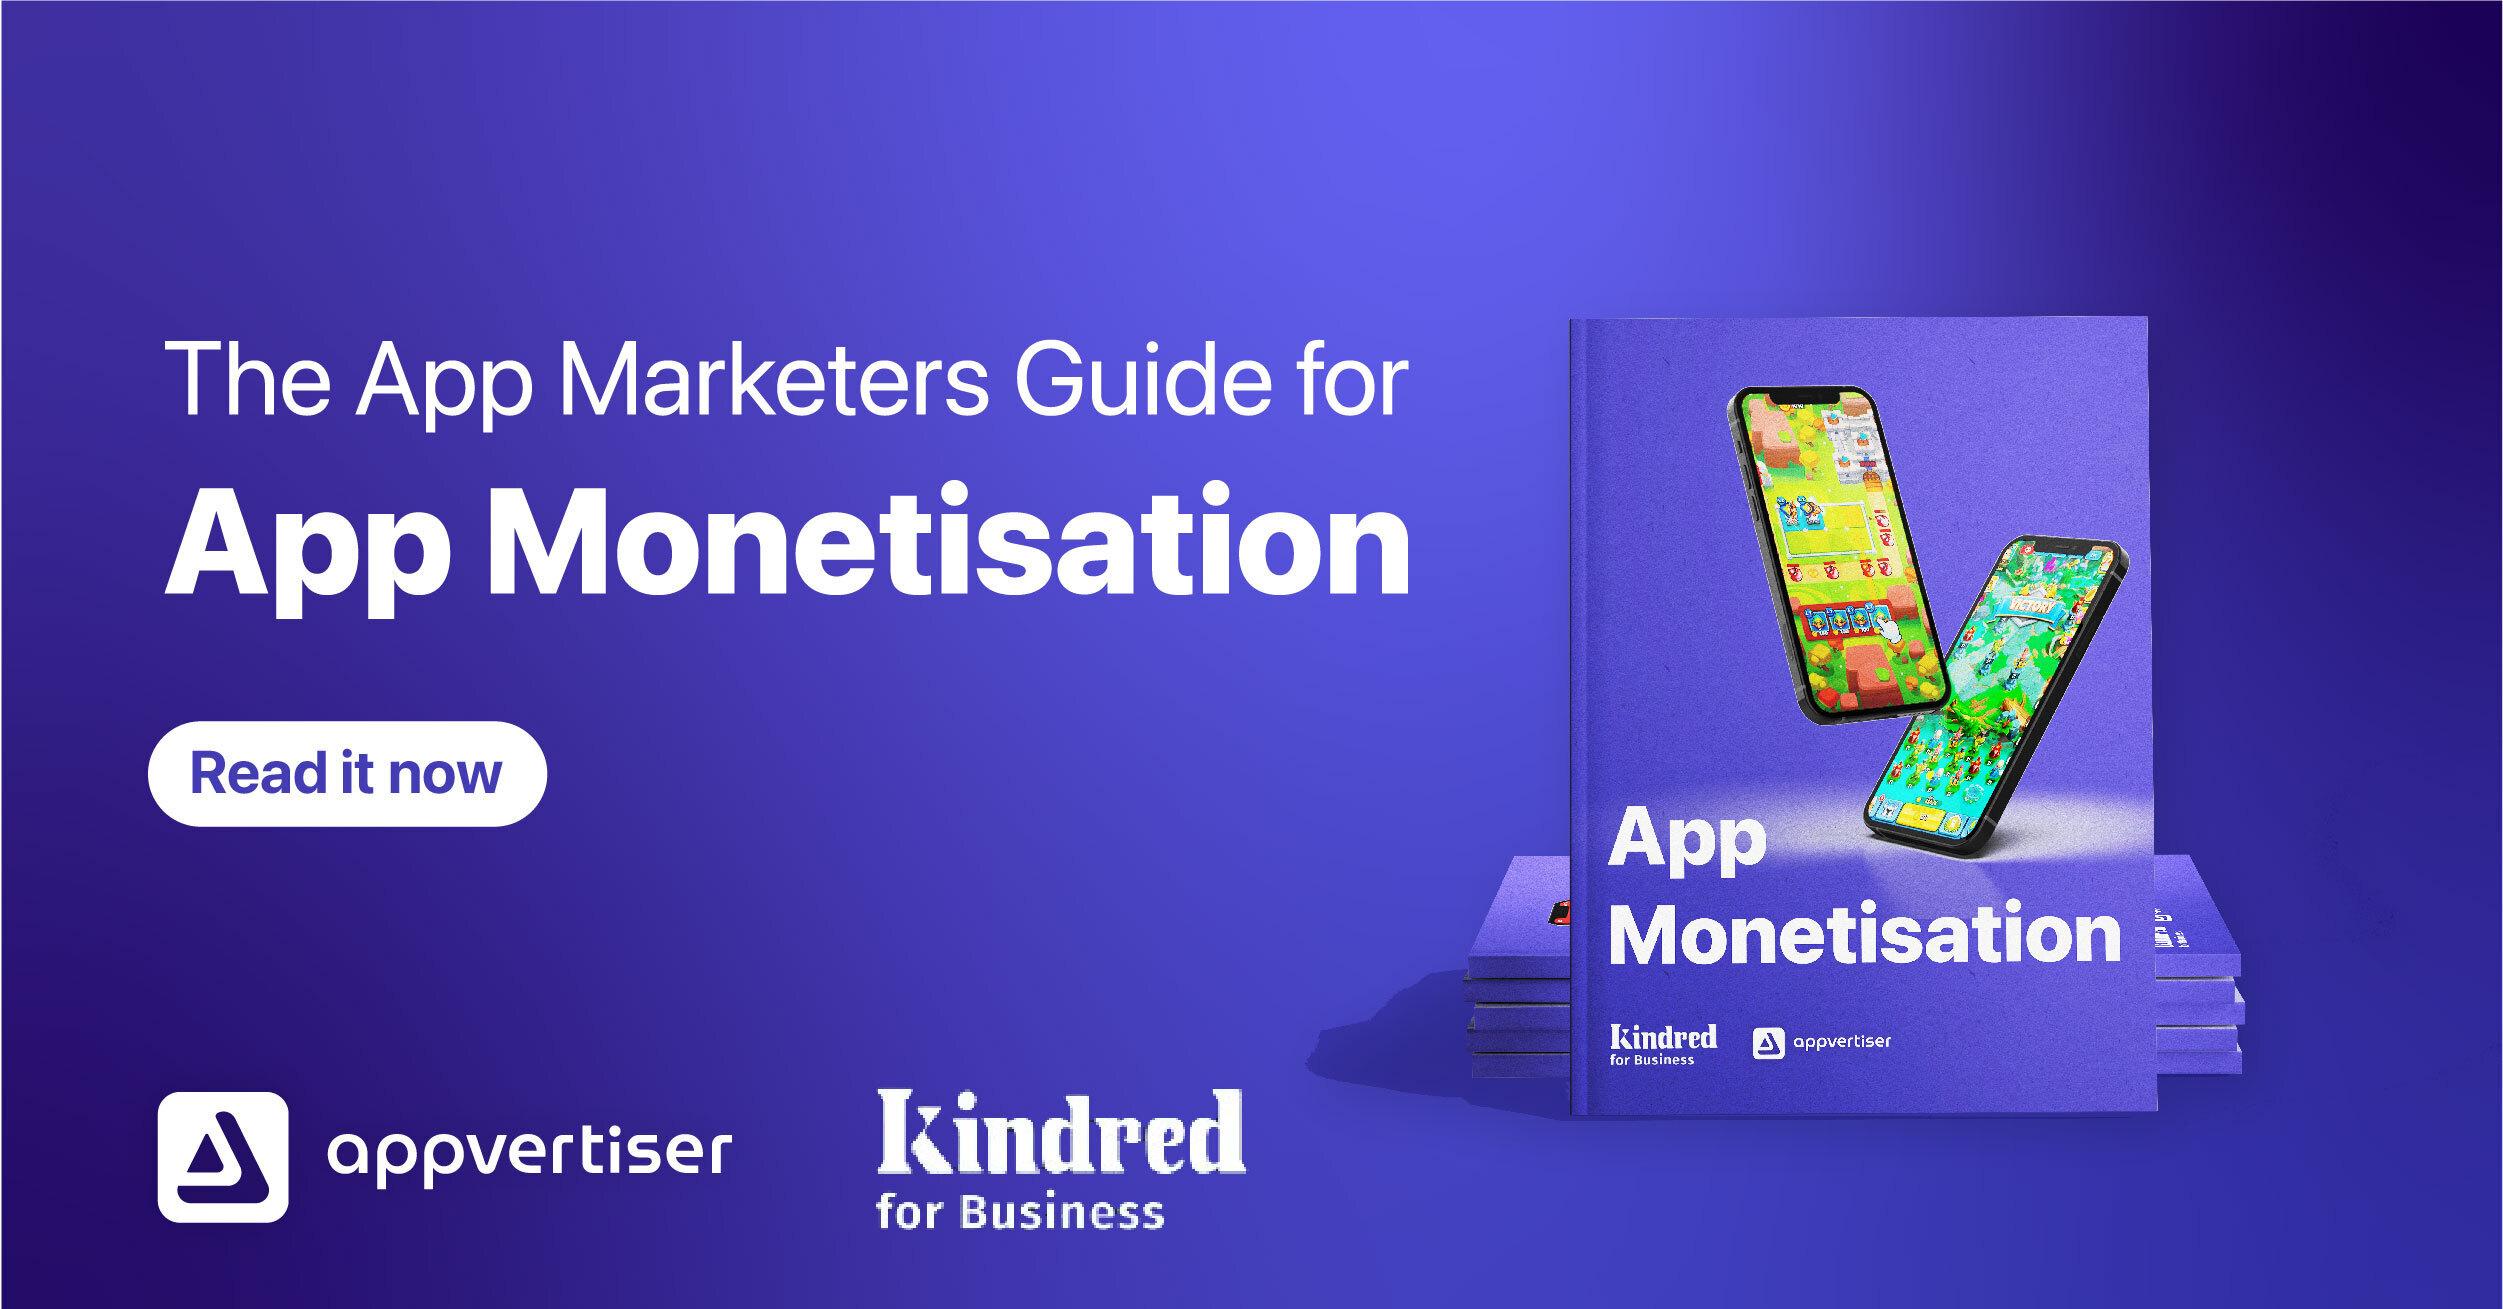 The App Marketers Guide for App Monetisation